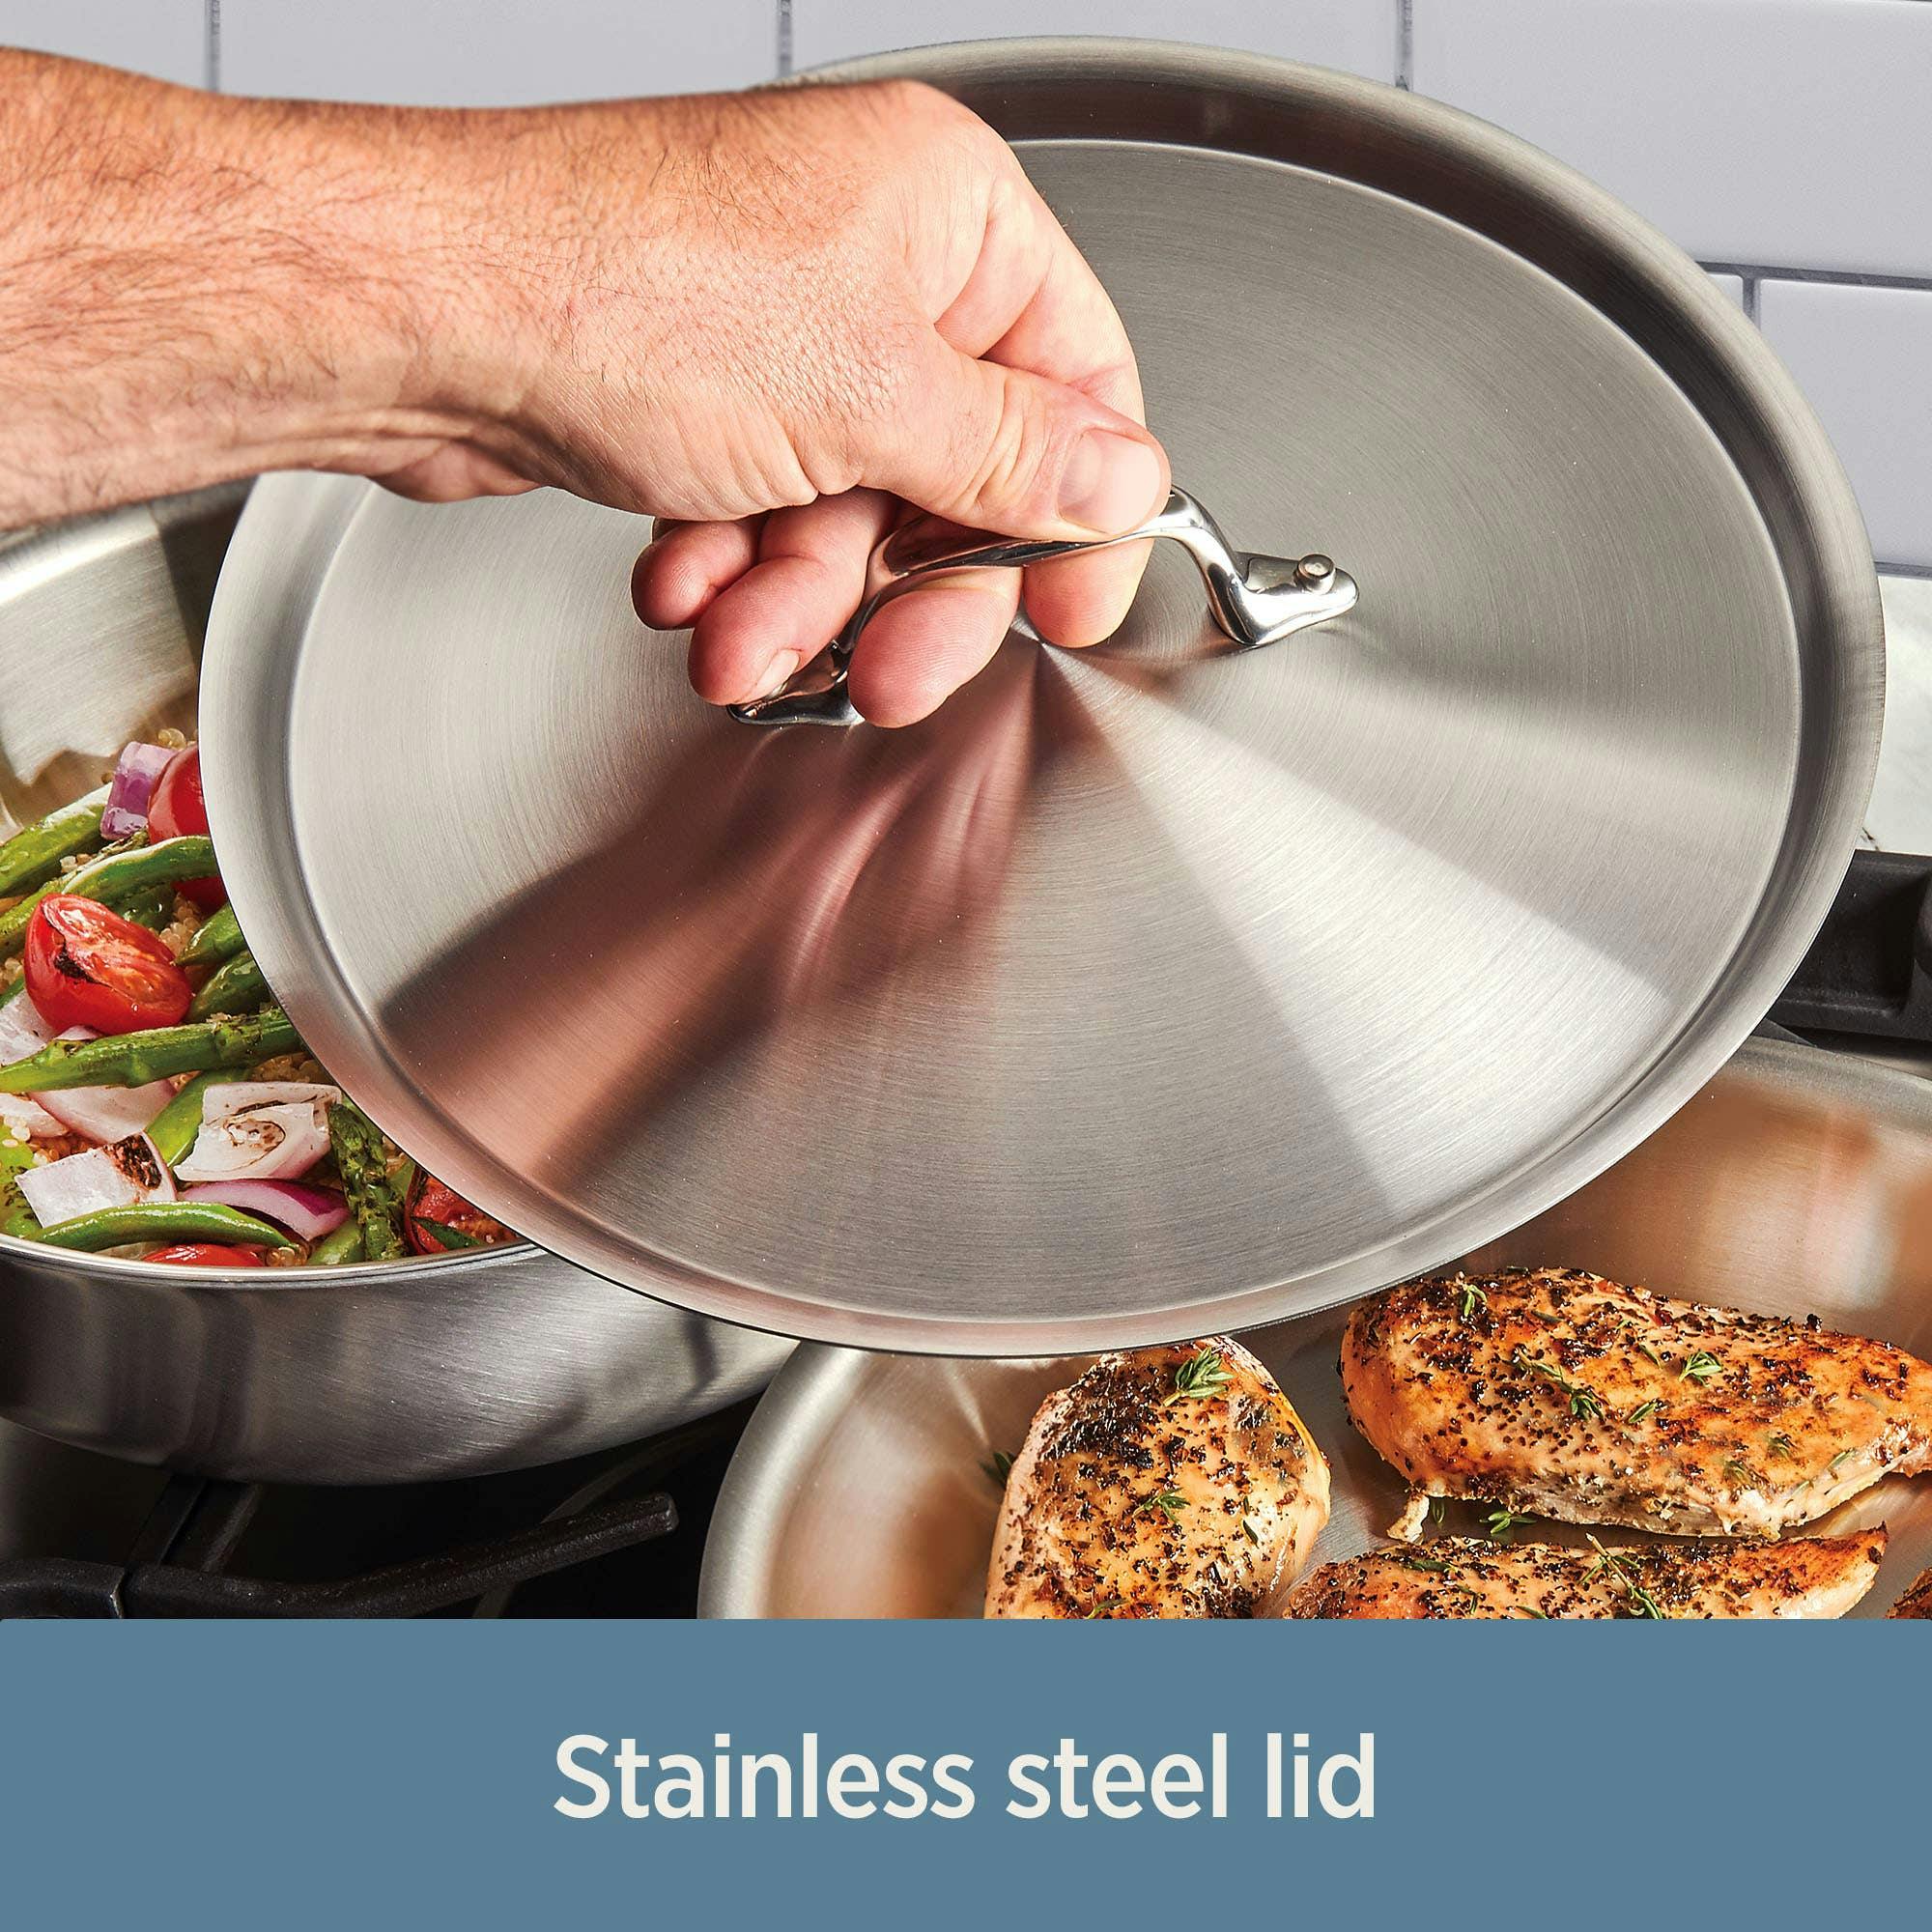 All-Clad D3 Stainless Steel 5-Piece Set